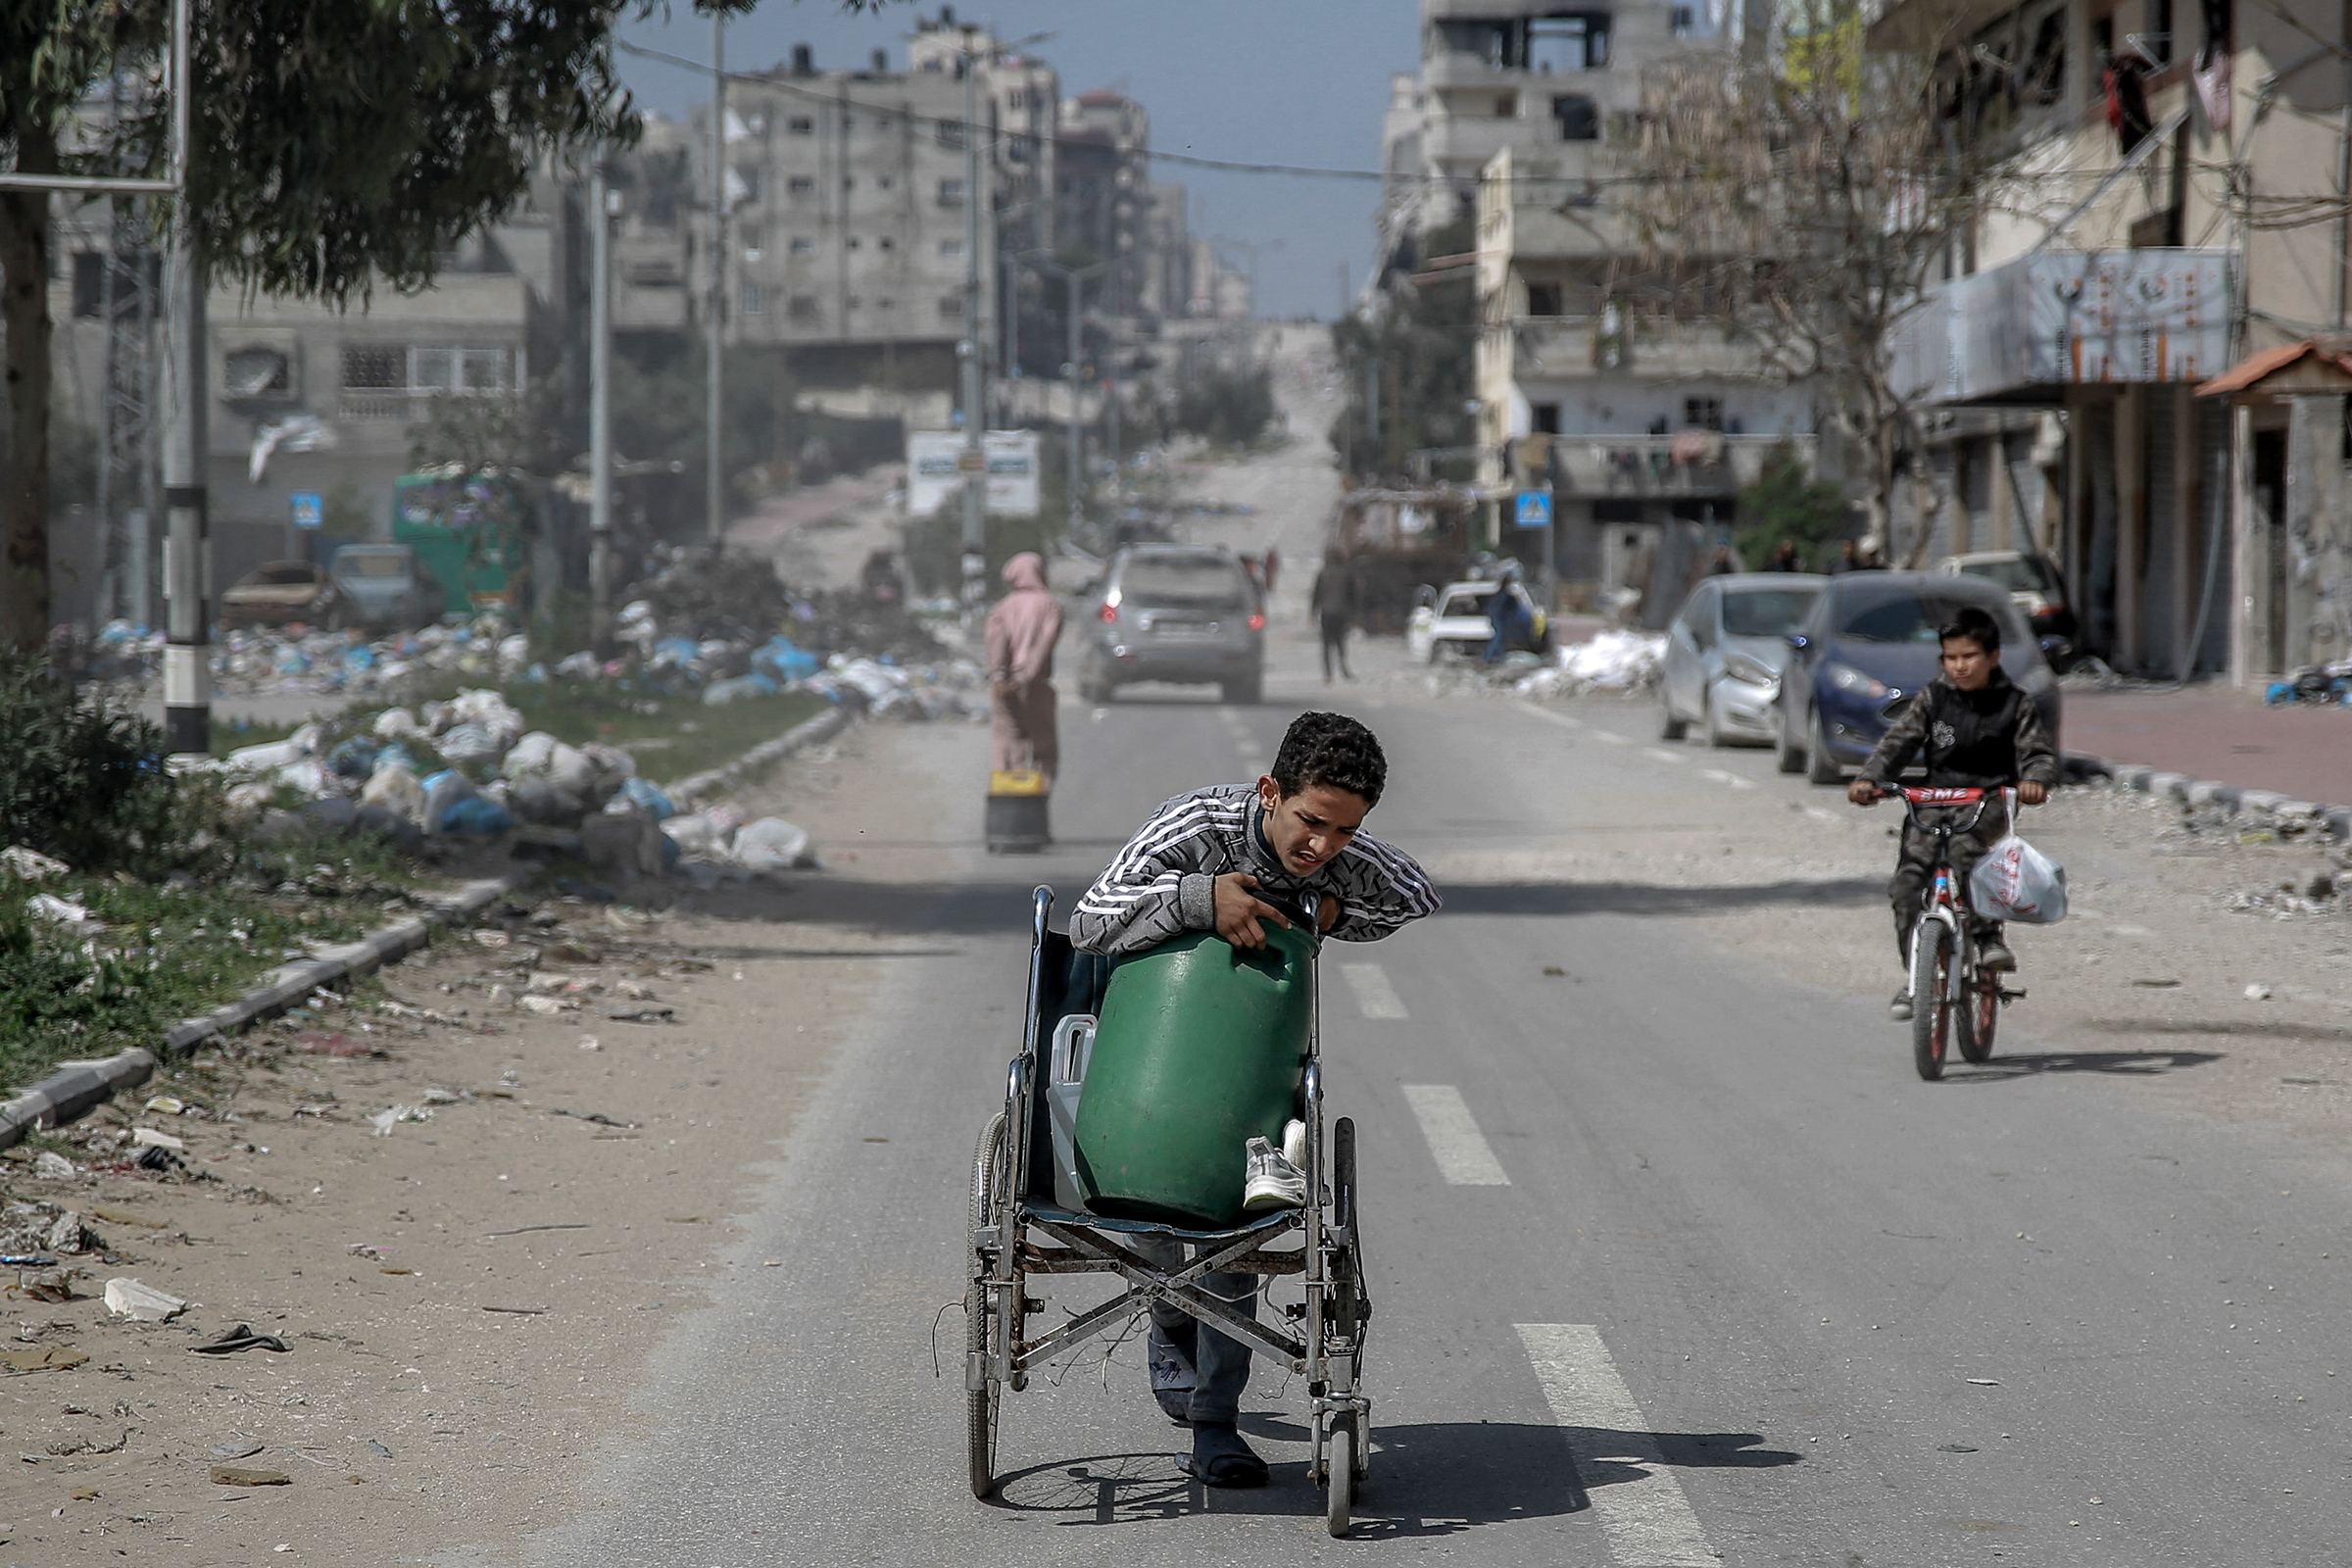 A Palestinian boy transports a water container on a wheelchair along a street in Gaza City on March 3, amid the ongoing conflict between Israel and Hamas.